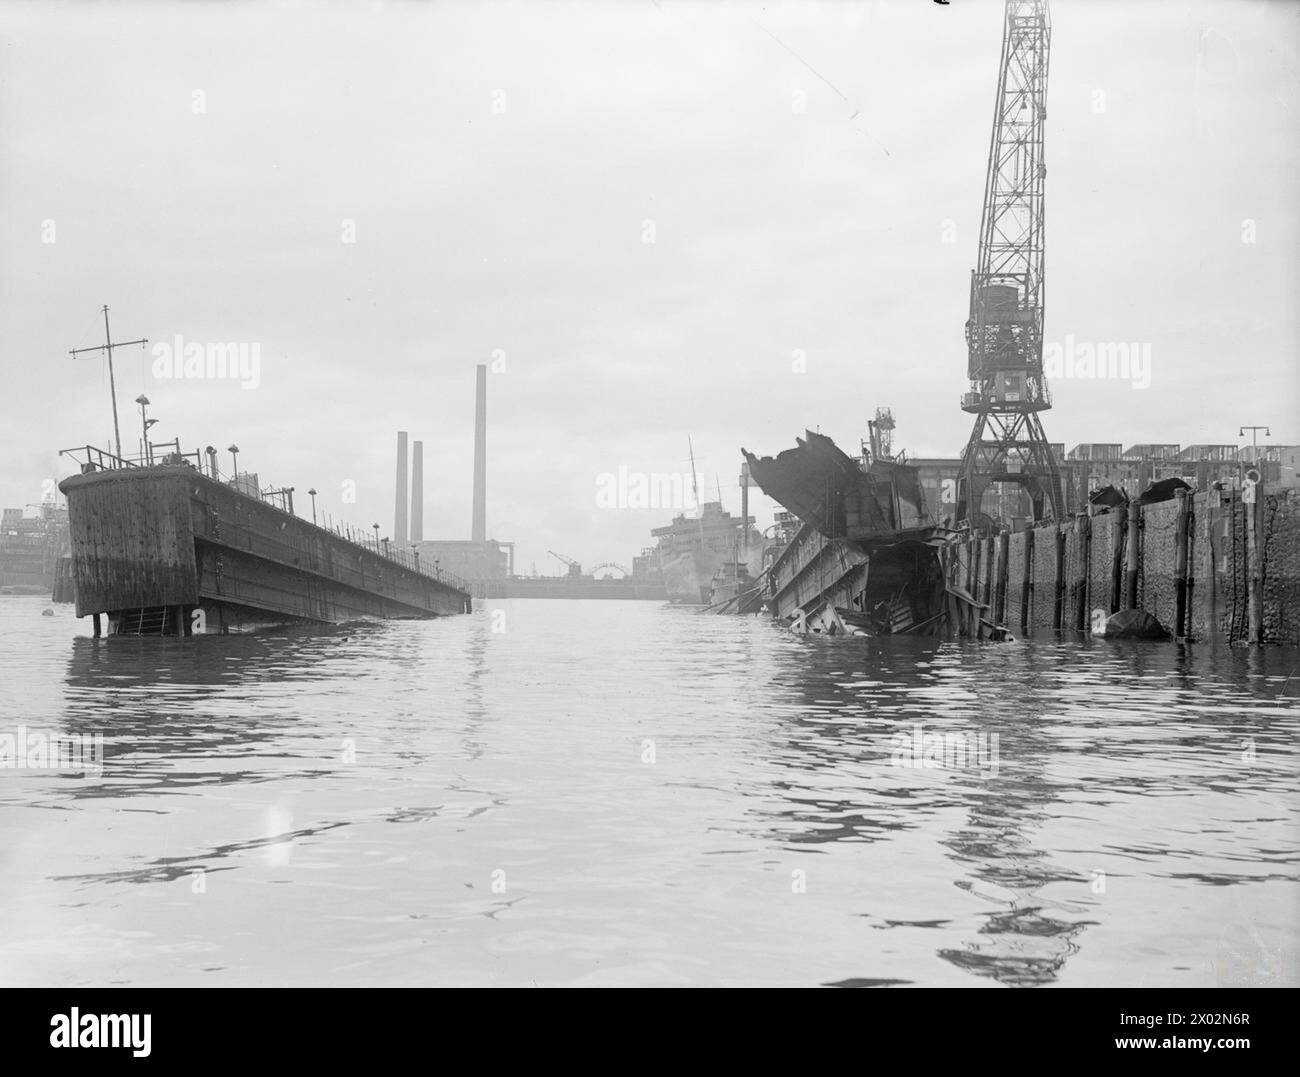 WRECKAGE IN THE BOMB-SCARRED HAMBURG DOCKS. 8 JULY 1945, WRECKED AND BURNT OUT GERMAN SHIPPING IN THE BOMB-BATTERED DOCKS AT HAMBURG. - The ROBERT LEY, 'strength through joy' ship (right), viewed through a bombed, torn and sunk floating dock Stock Photo